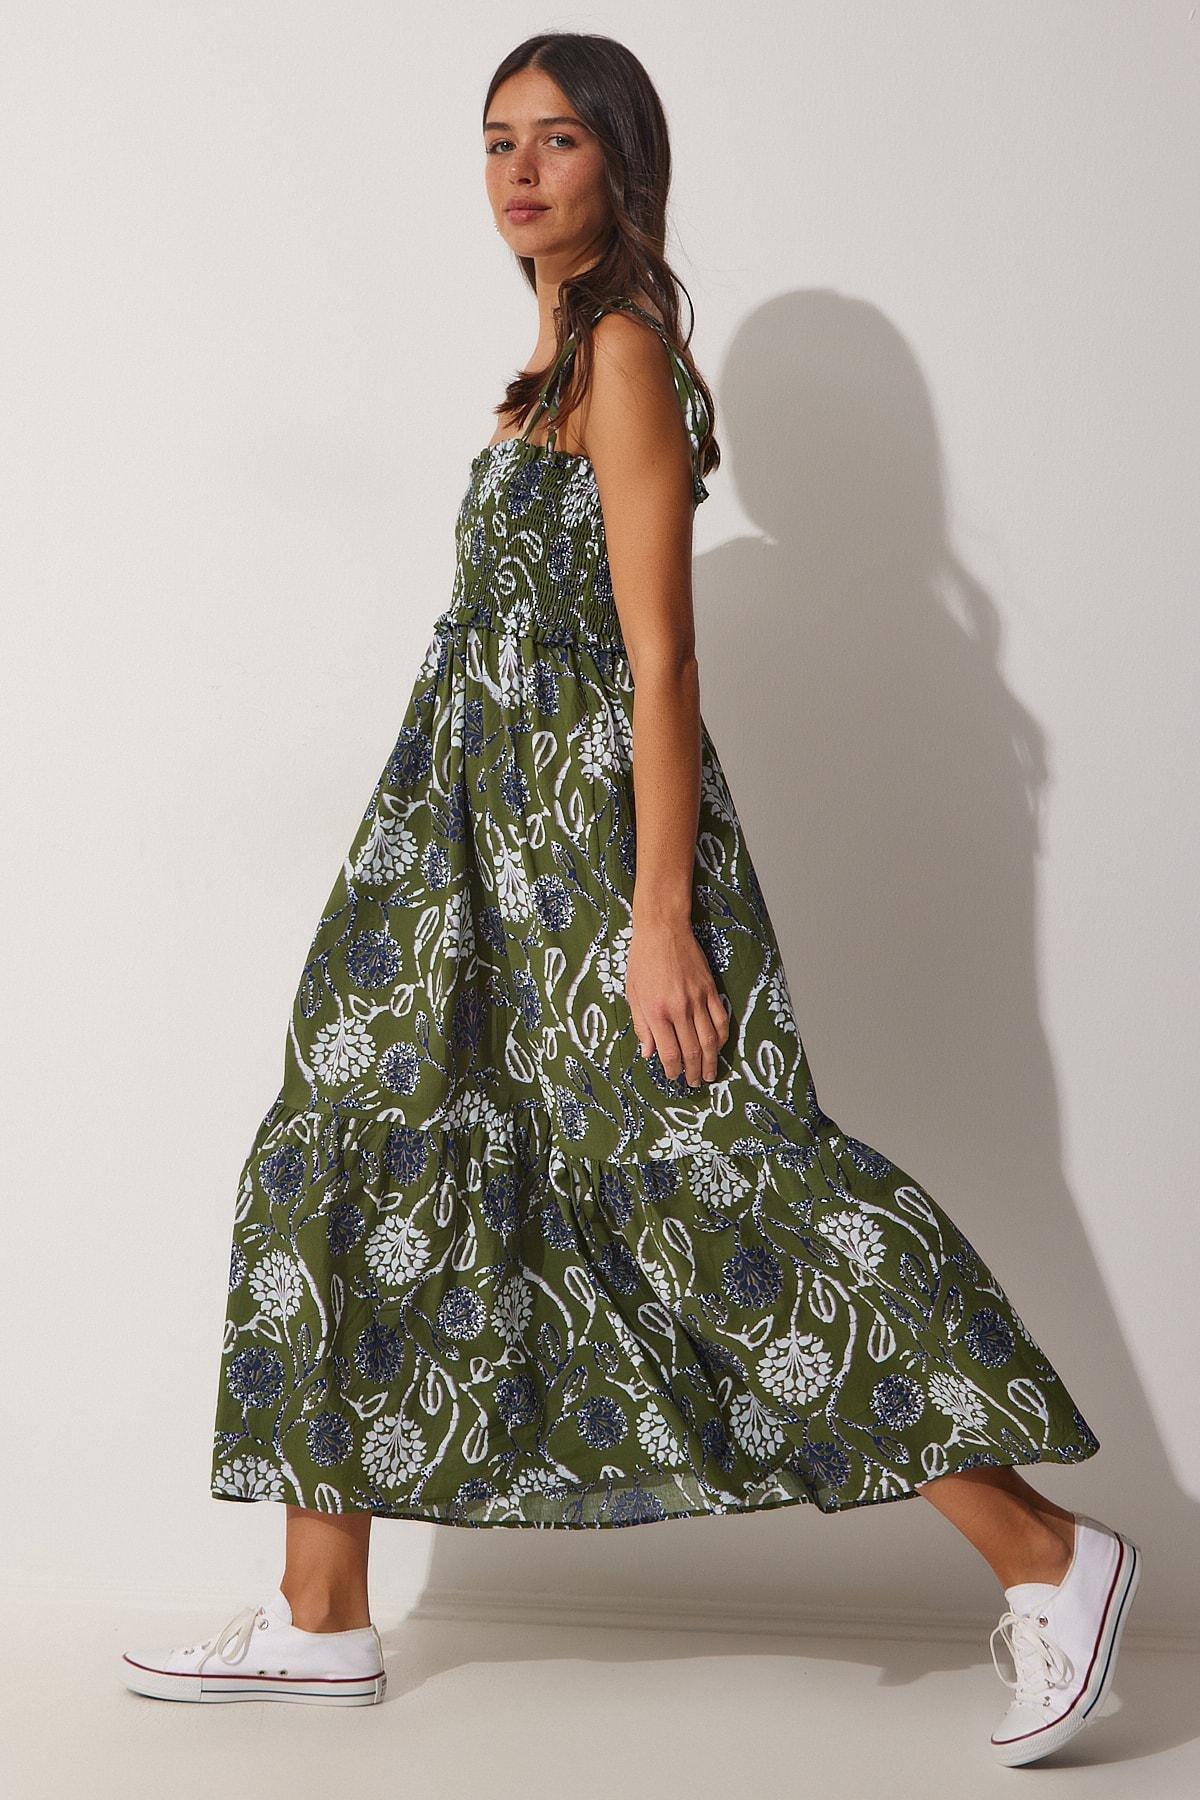 Happiness Istanbul - Green Floral Dress